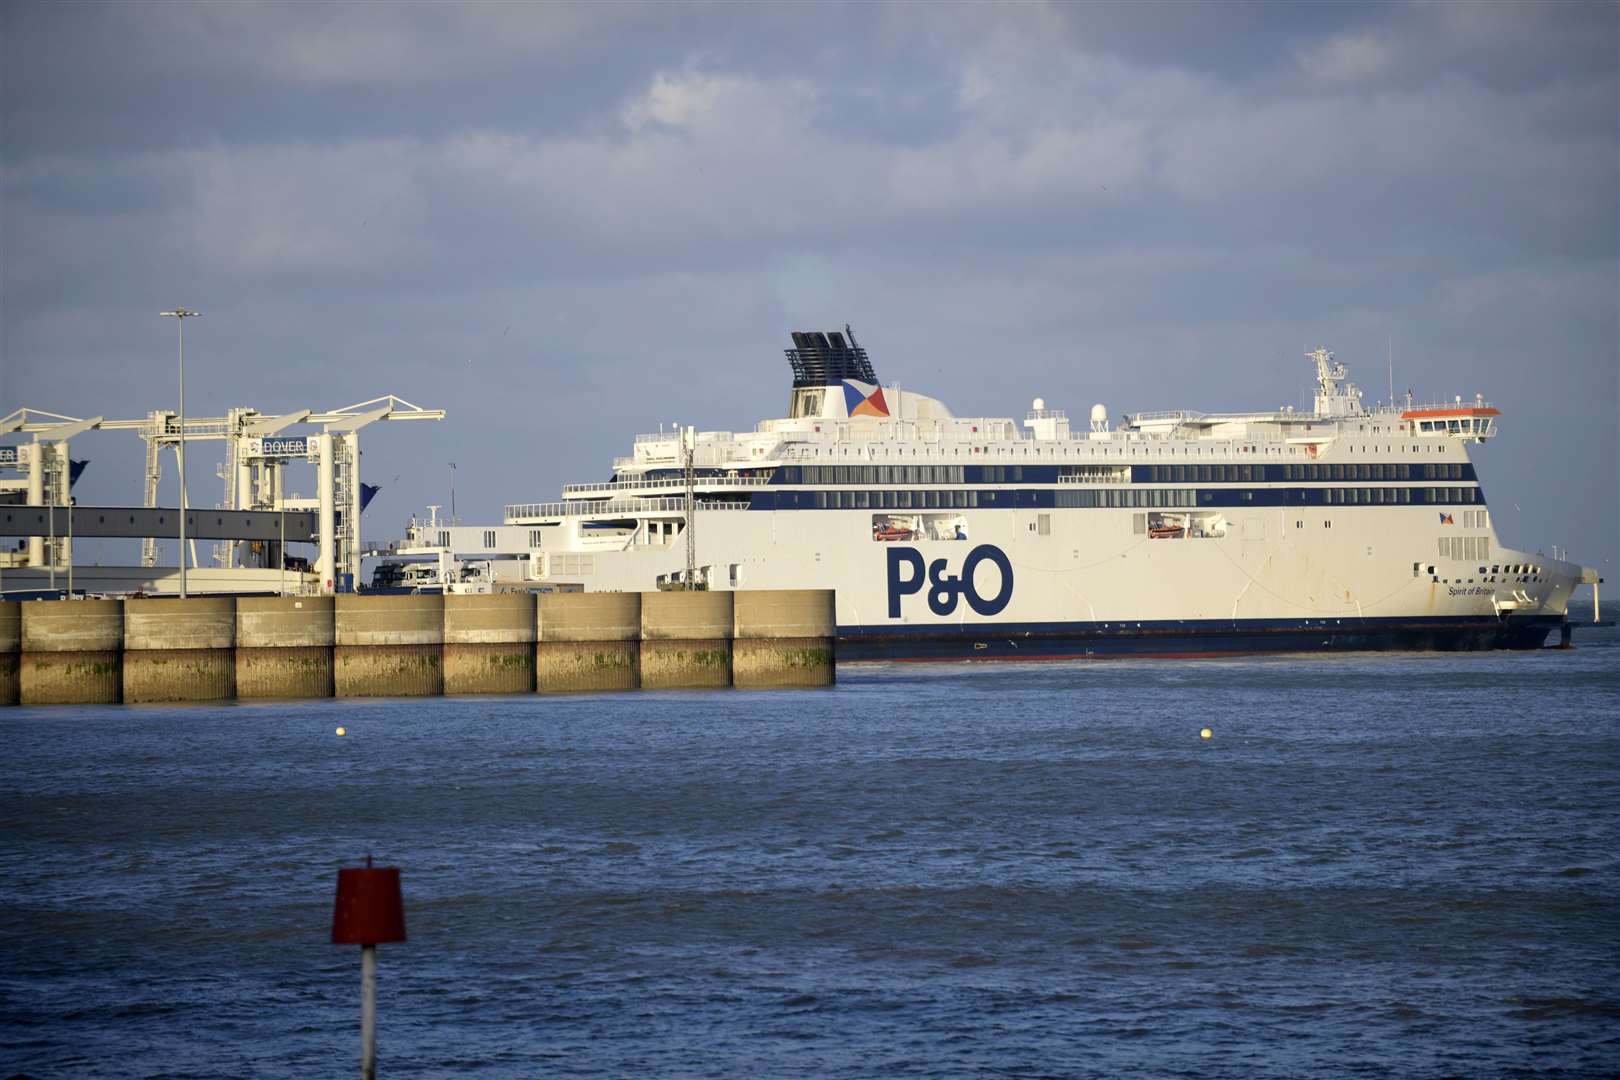 P&O Ferries, based in Dover, have announced plans to make over 1000 people redundant - 614 of them are from Dover